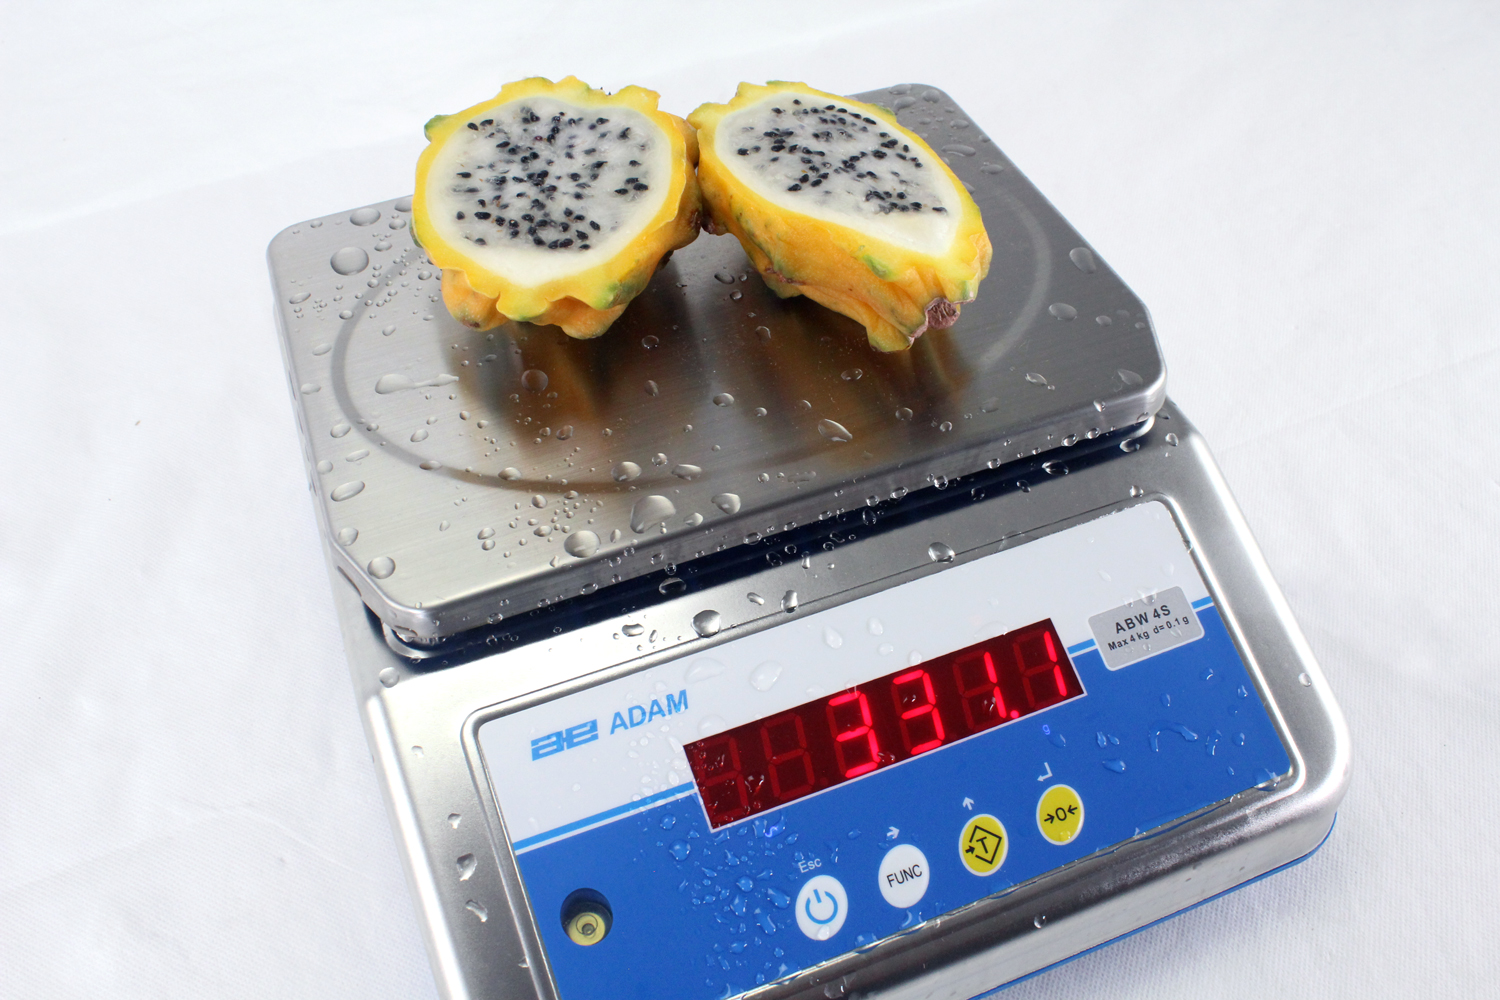 IP68 rated food scales